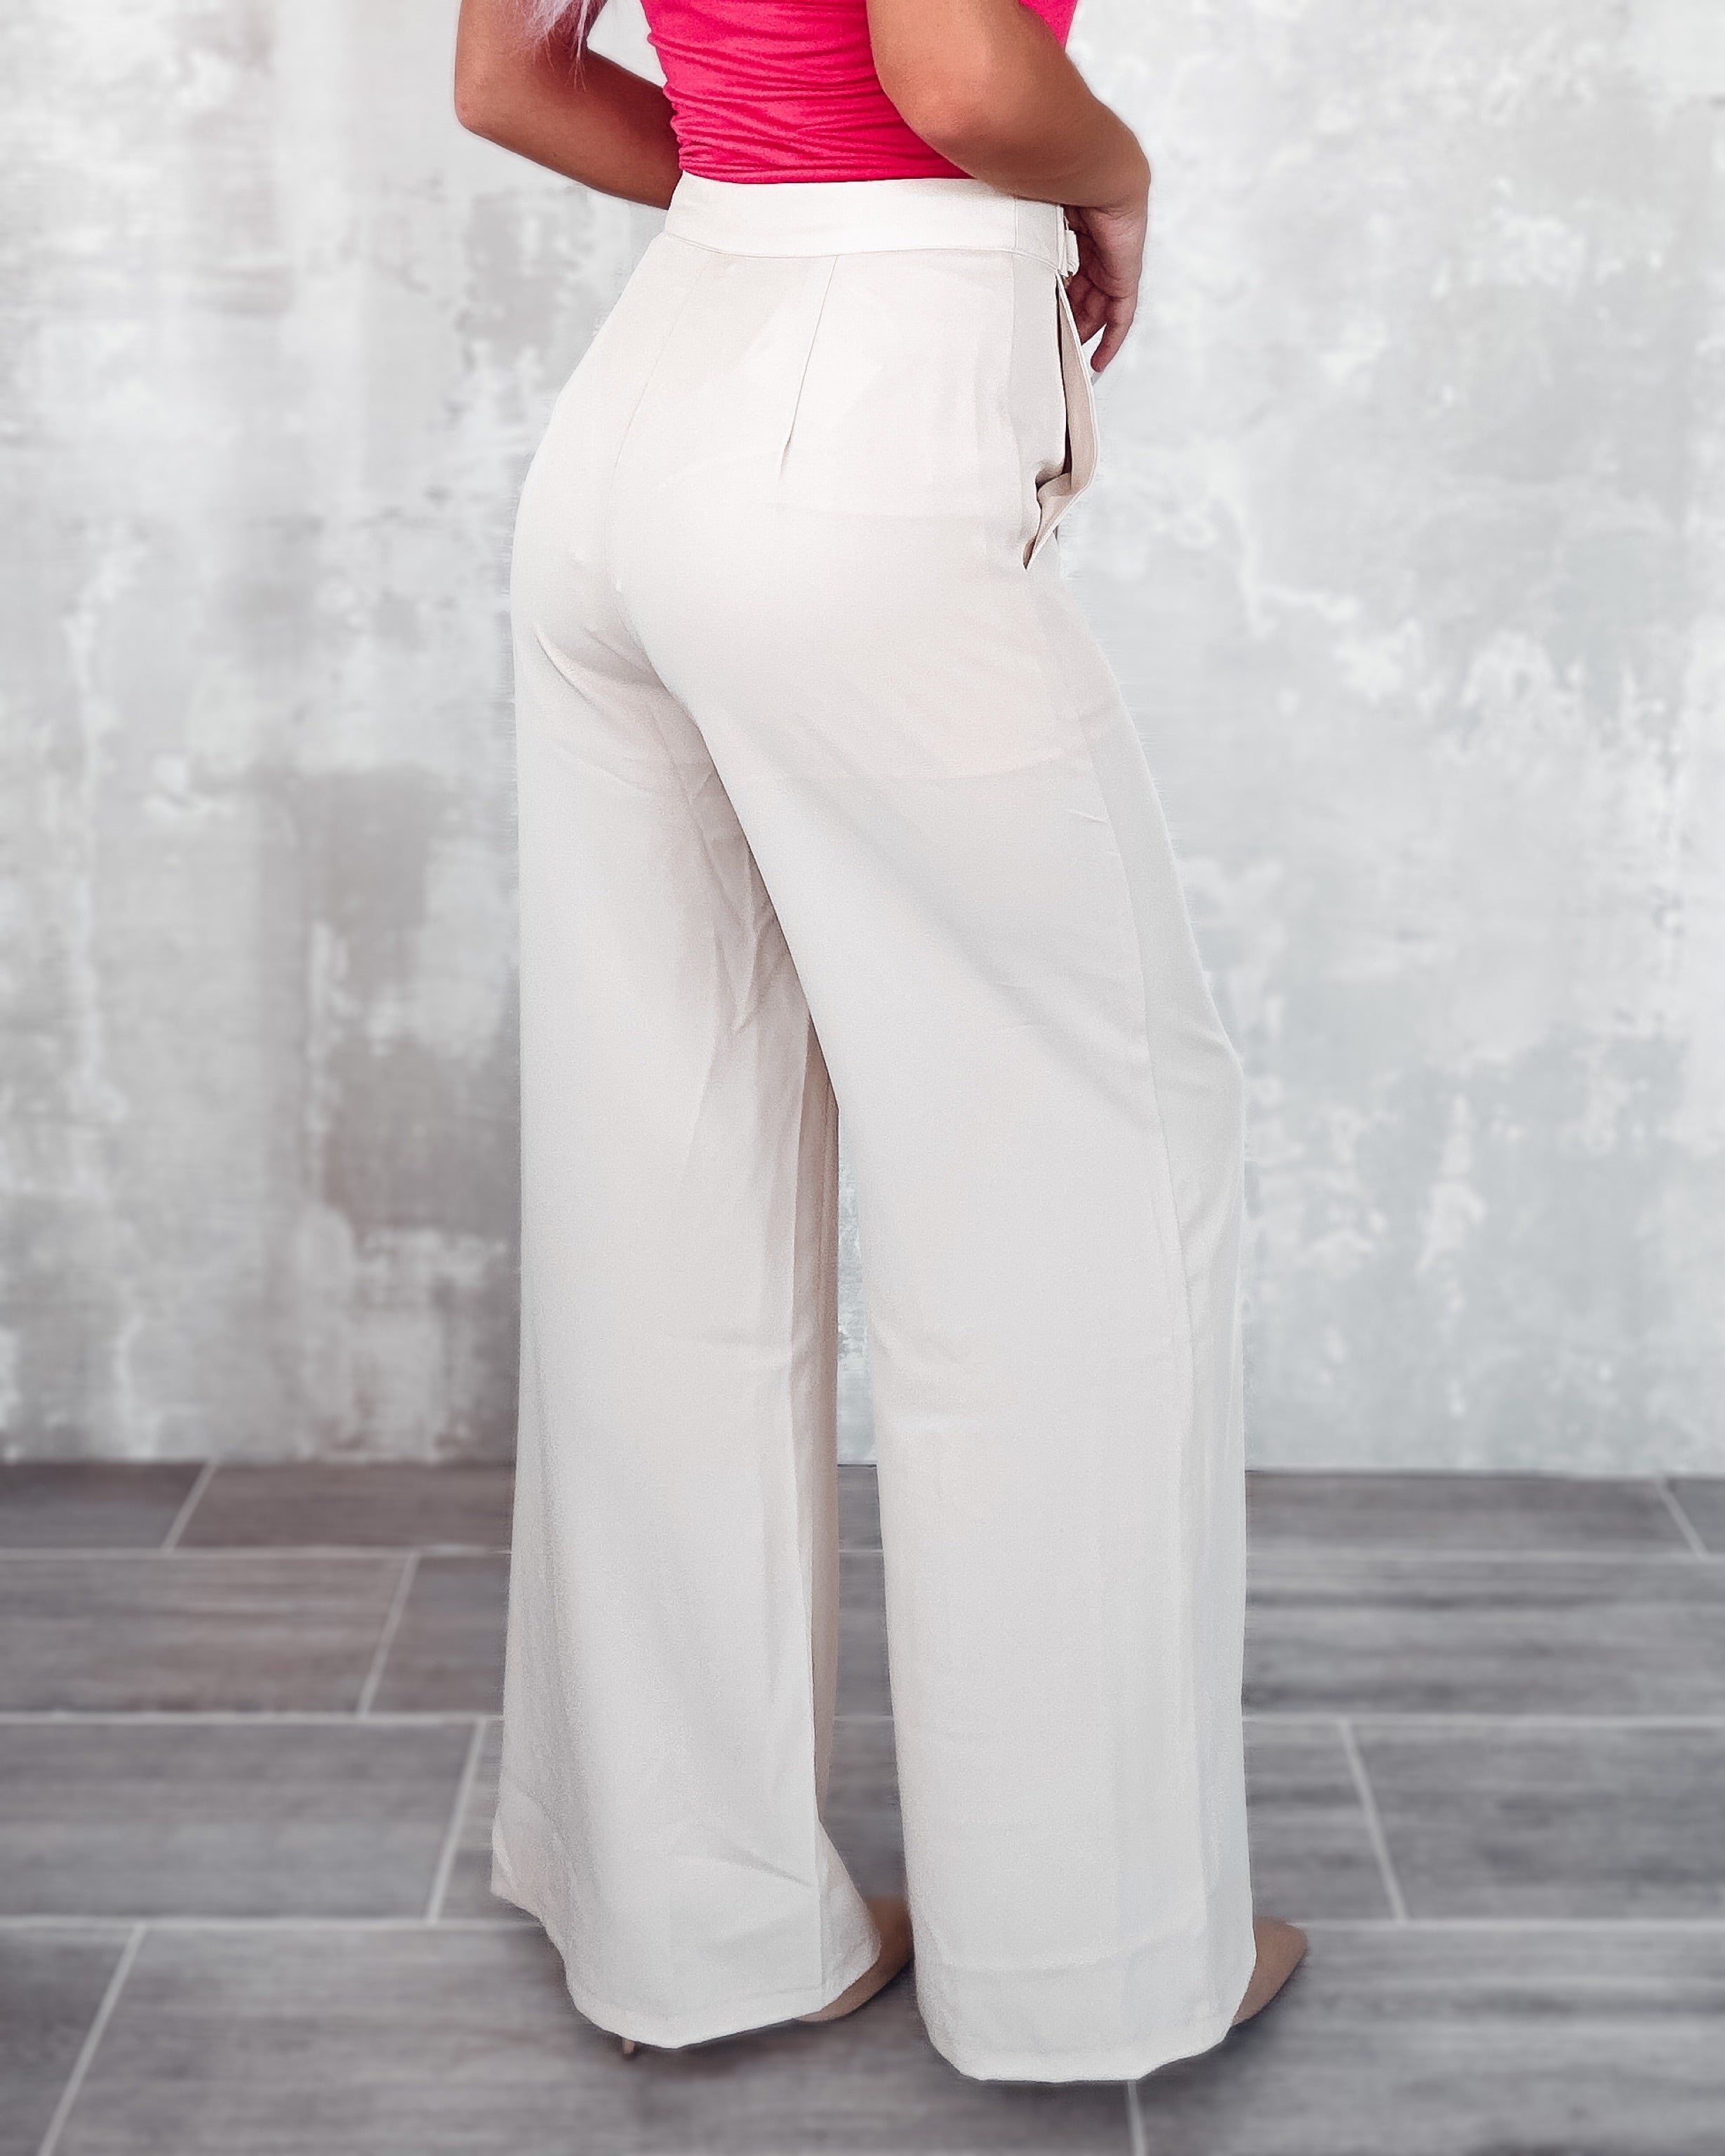 Belted Boss Babe Pants - Beige